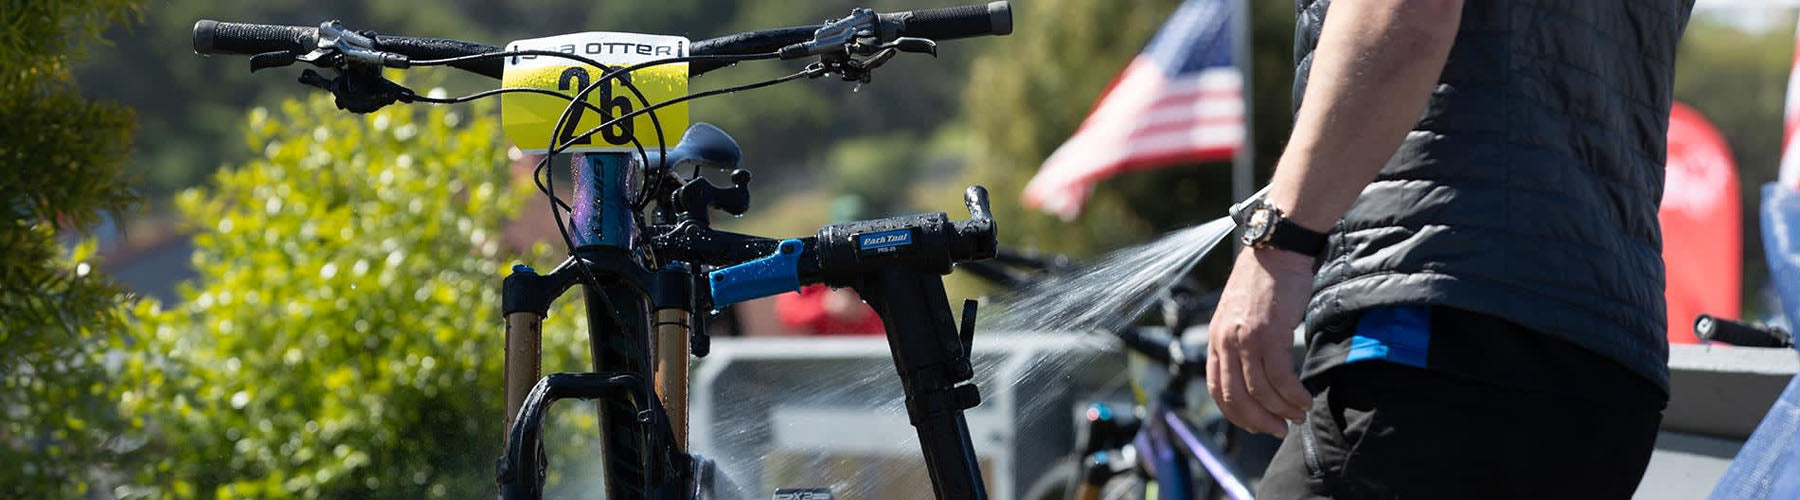 Shop bike chain lubes and cleaners